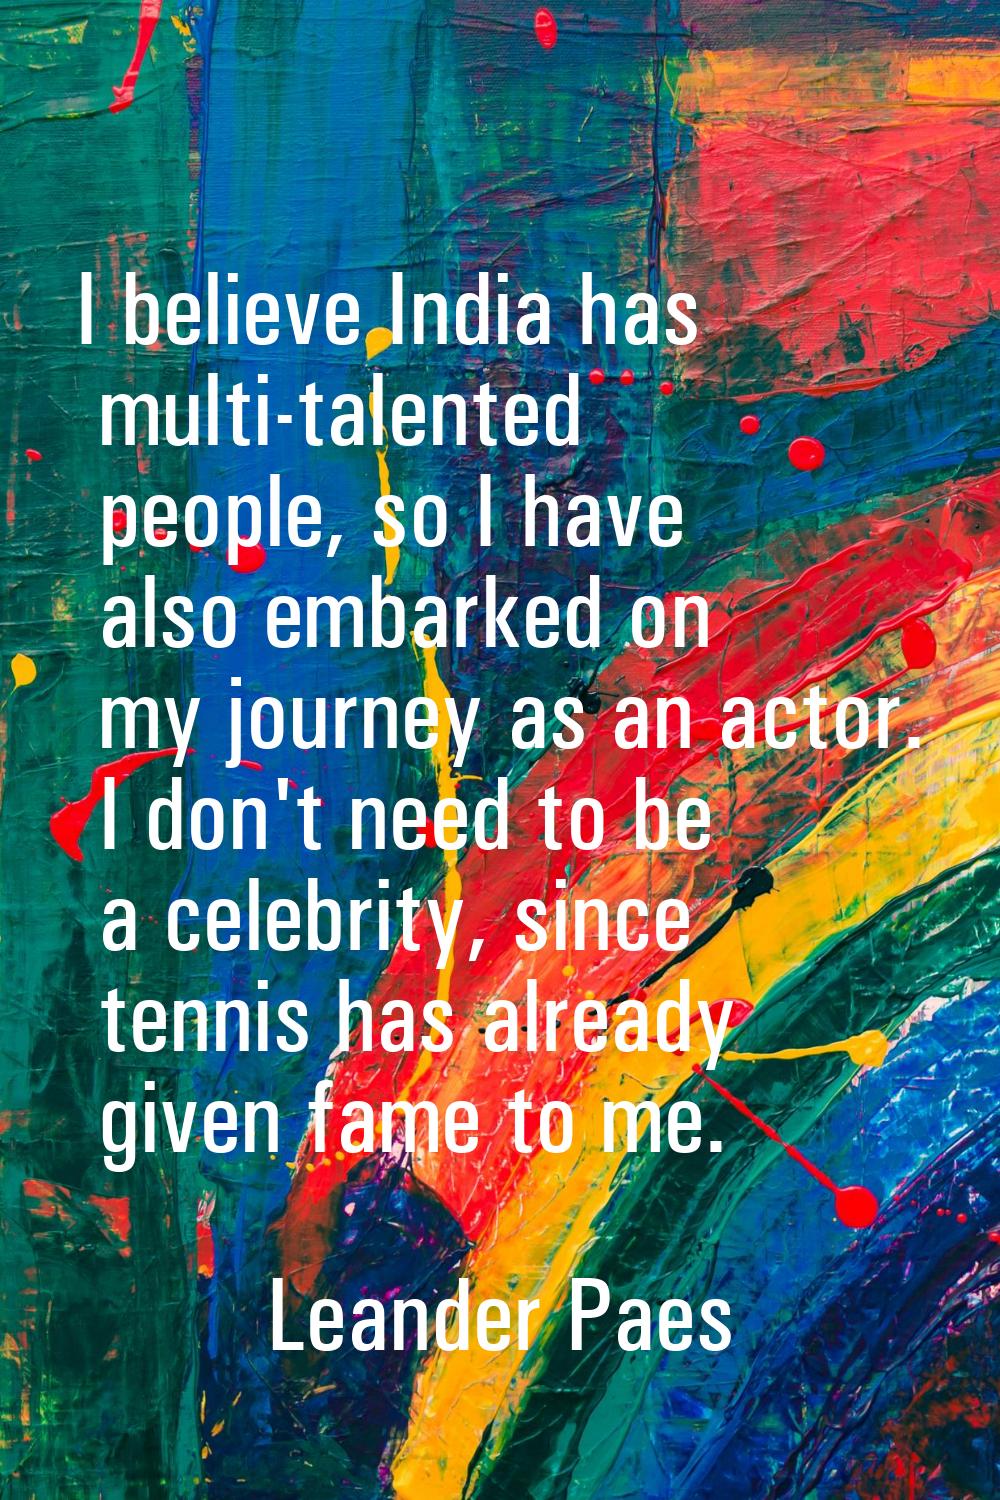 I believe India has multi-talented people, so I have also embarked on my journey as an actor. I don